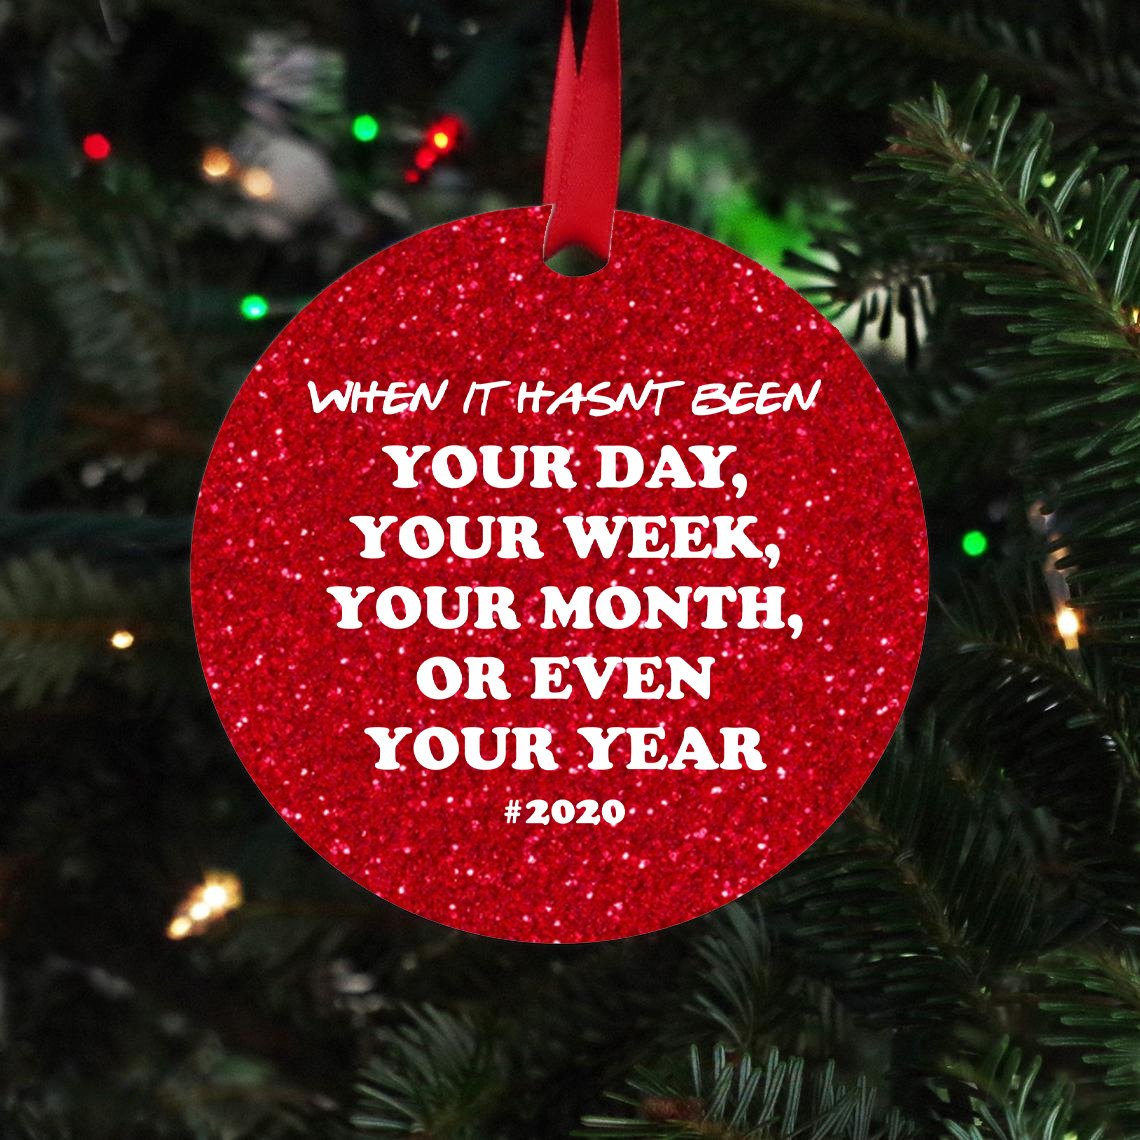 When It Hasnt Been Your Day Week Month Or Even Year #2020 Christmas Ornament